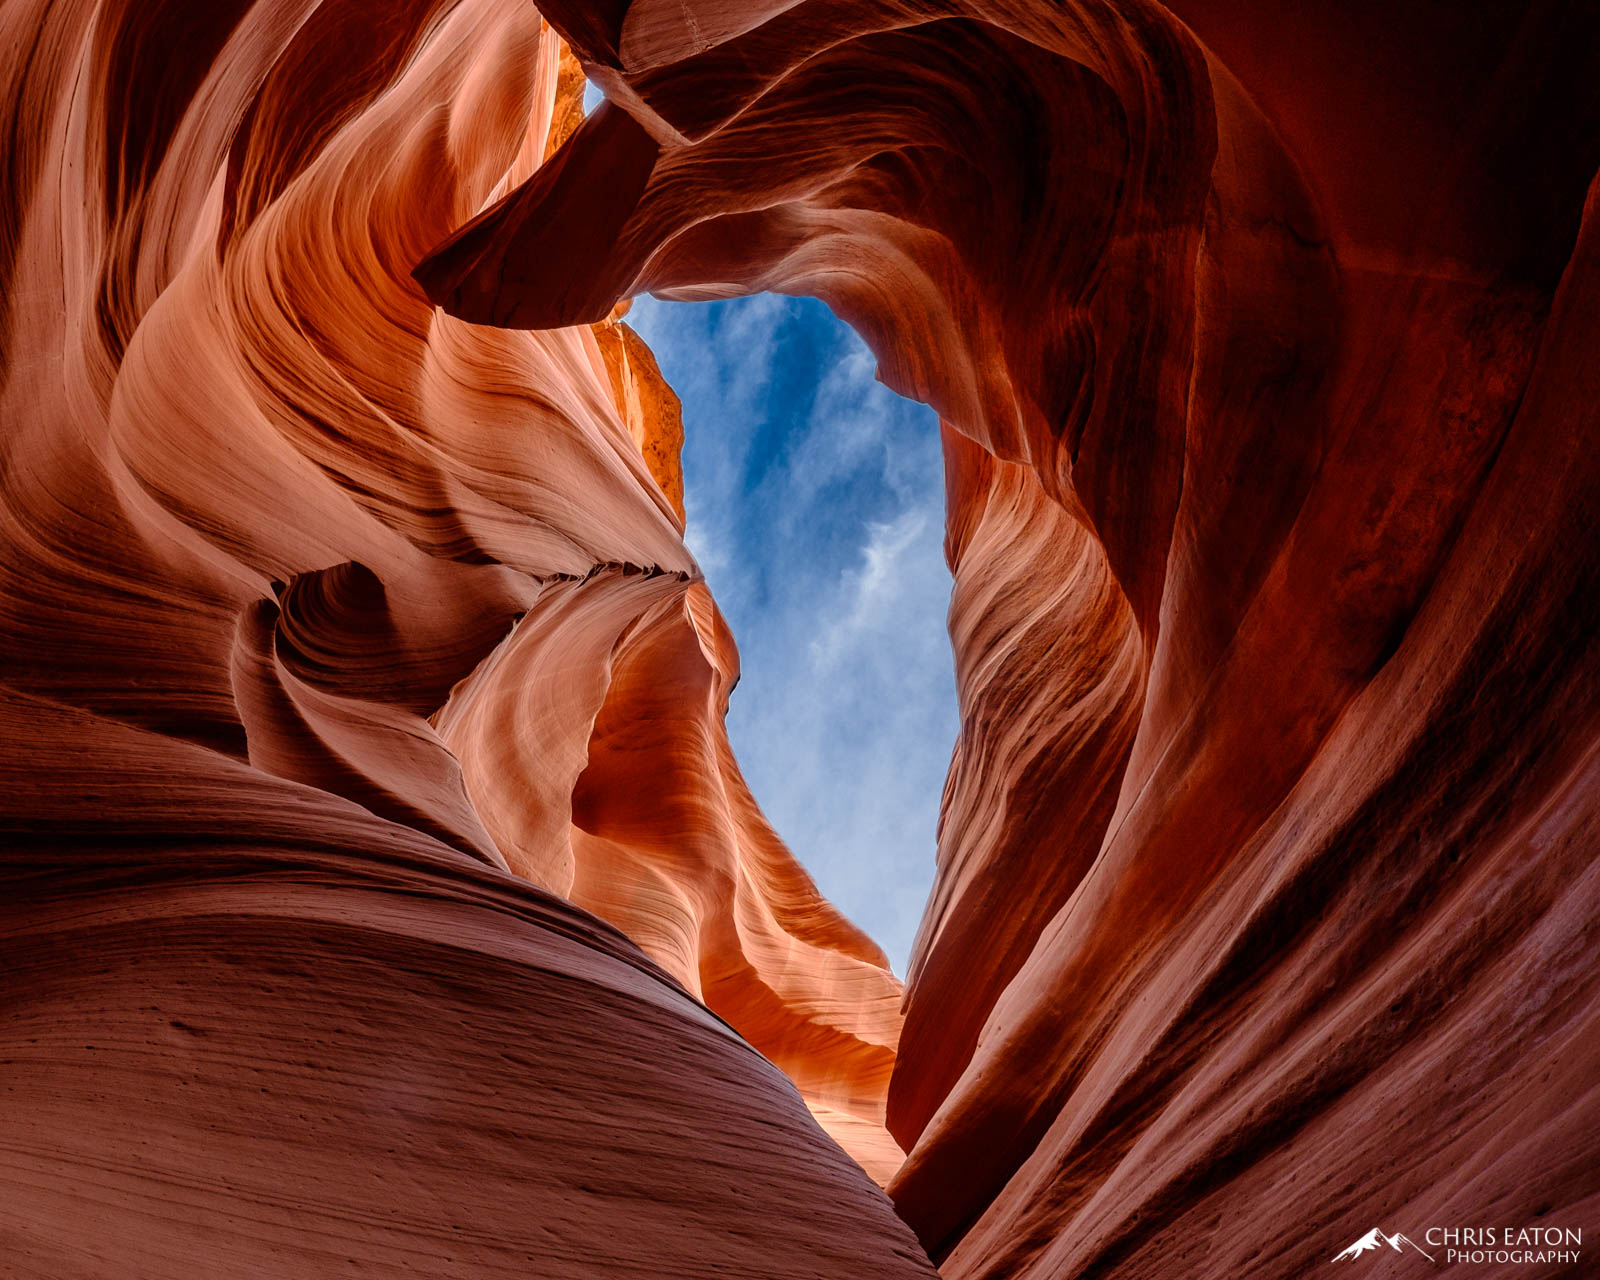 The sculpted curves of slot canyons carved into Navajo Sandstone, such as Lower Antelope Canyon, often wind their way deeply...